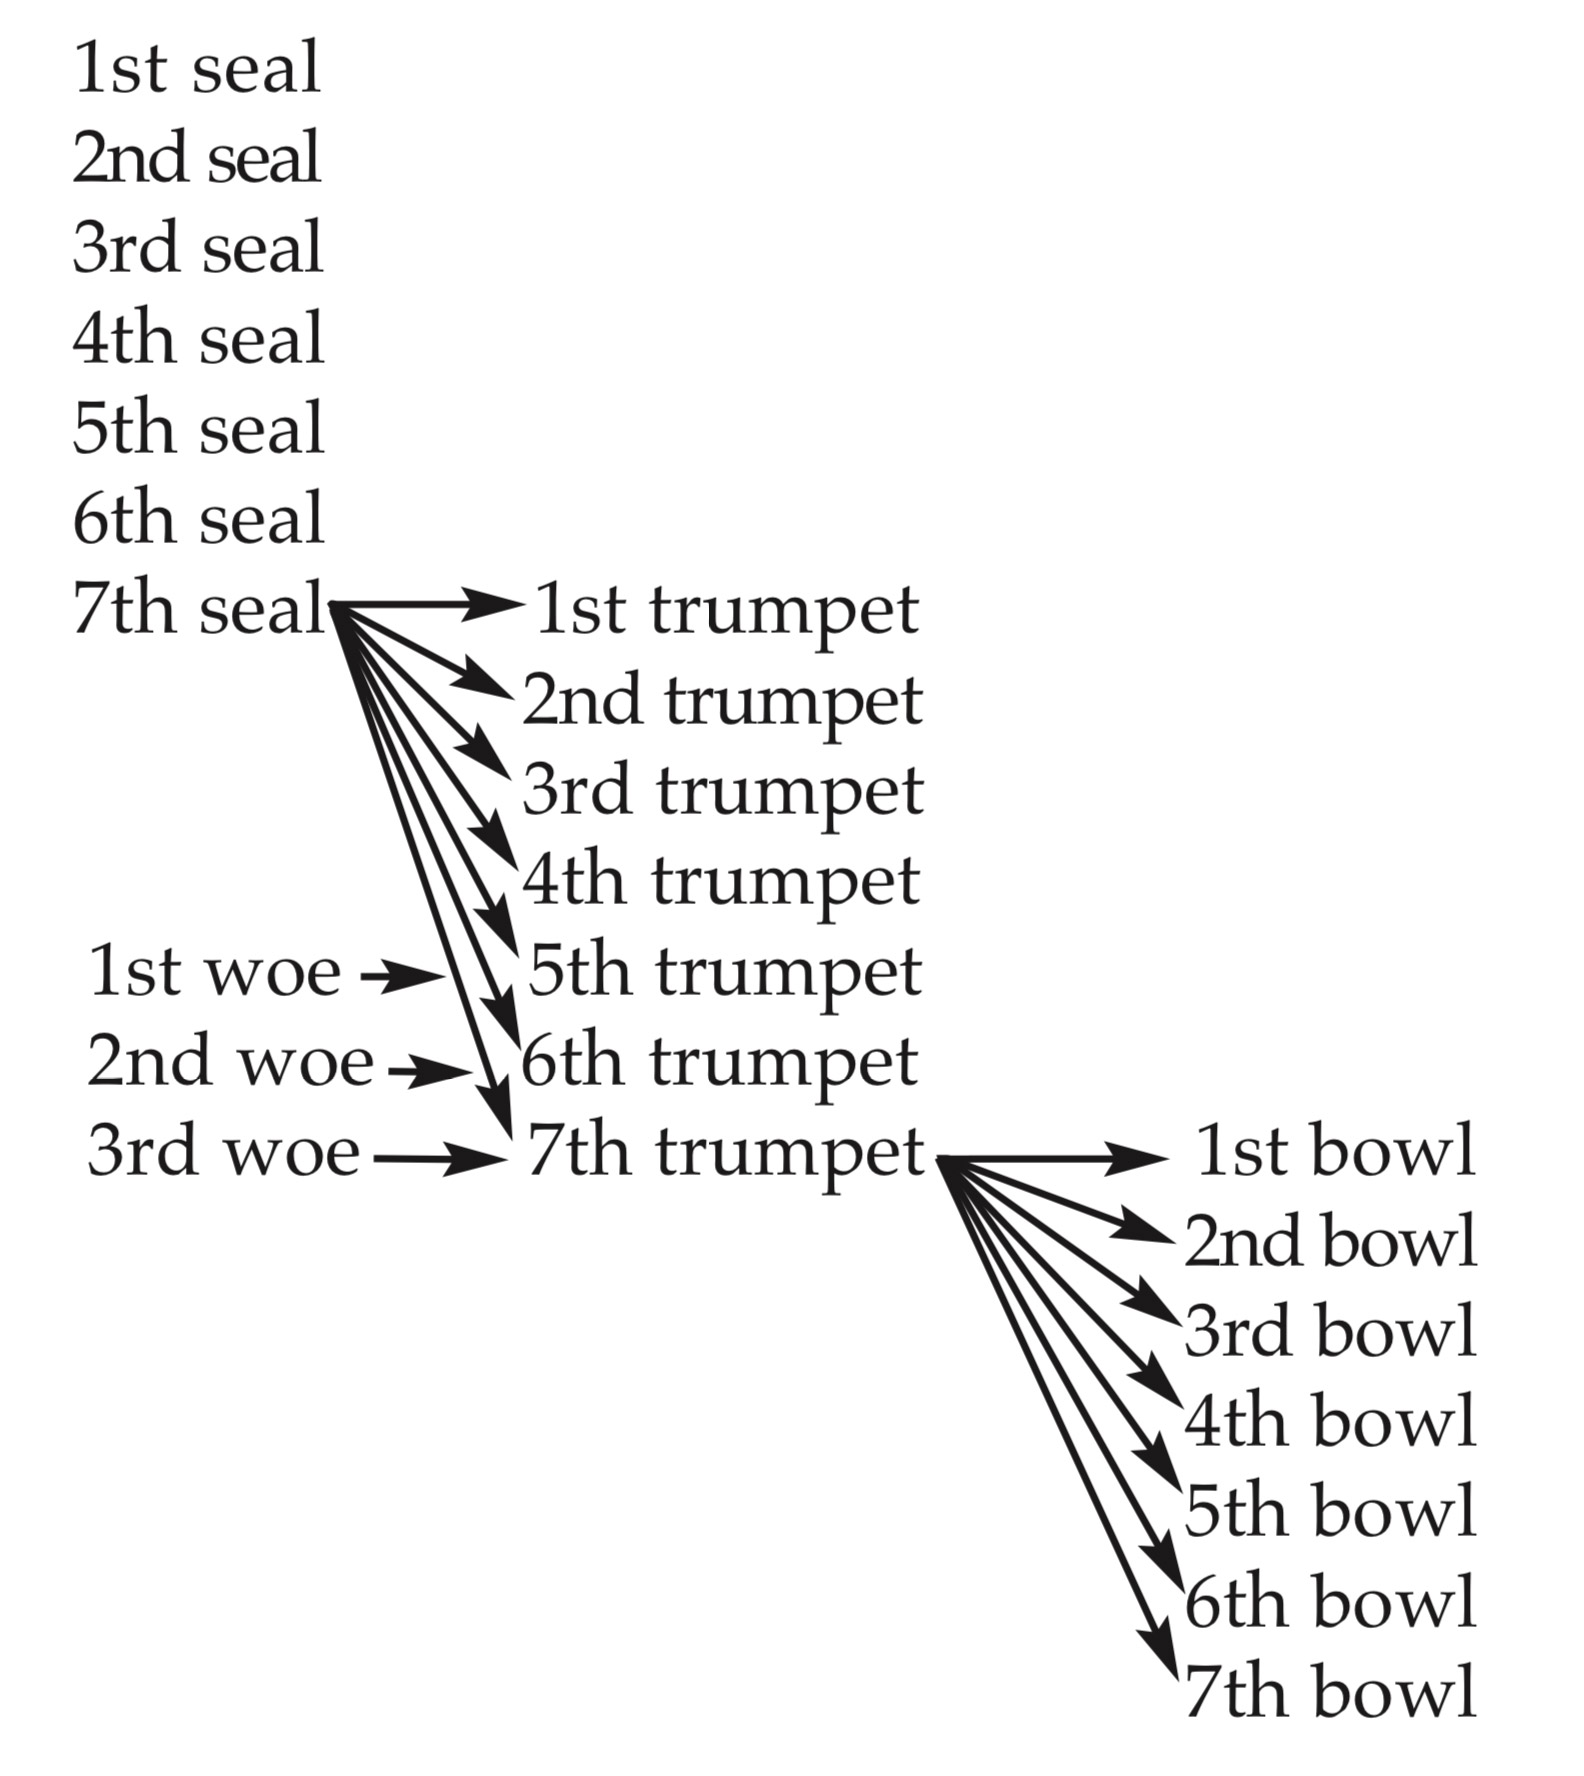 diagram to help understand the seals bowls and trumpets of the book of Revelation in the Bible